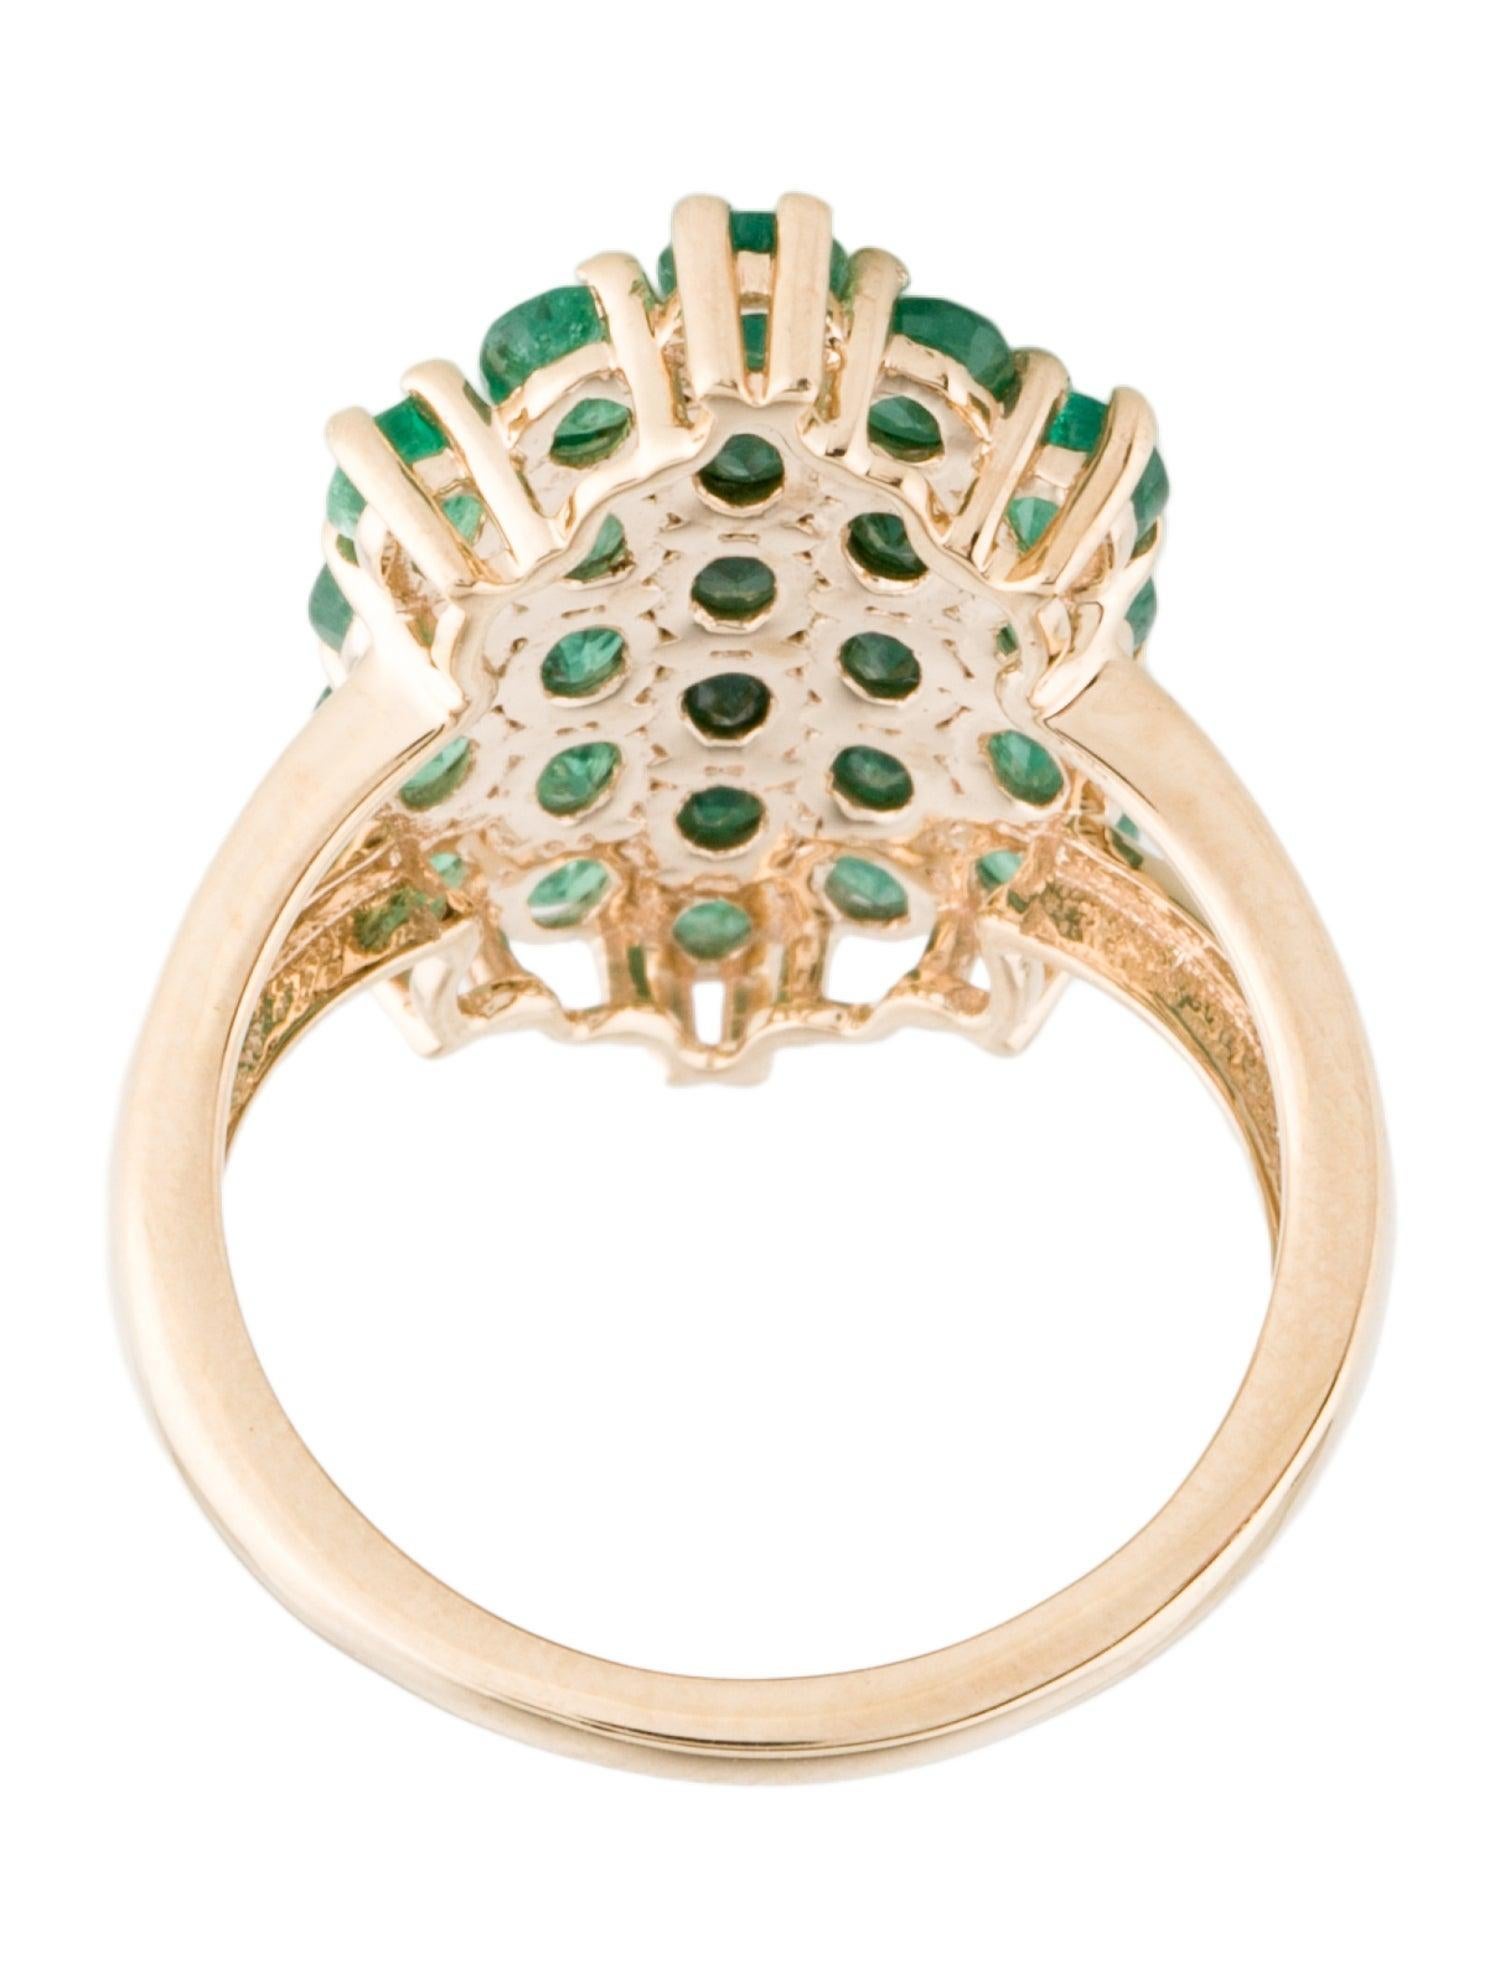 Gorgeous 14K Emerald Cocktail Ring - 2.59ctw Gemstones - Size 6.75 Vintage Ring In New Condition For Sale In Holtsville, NY